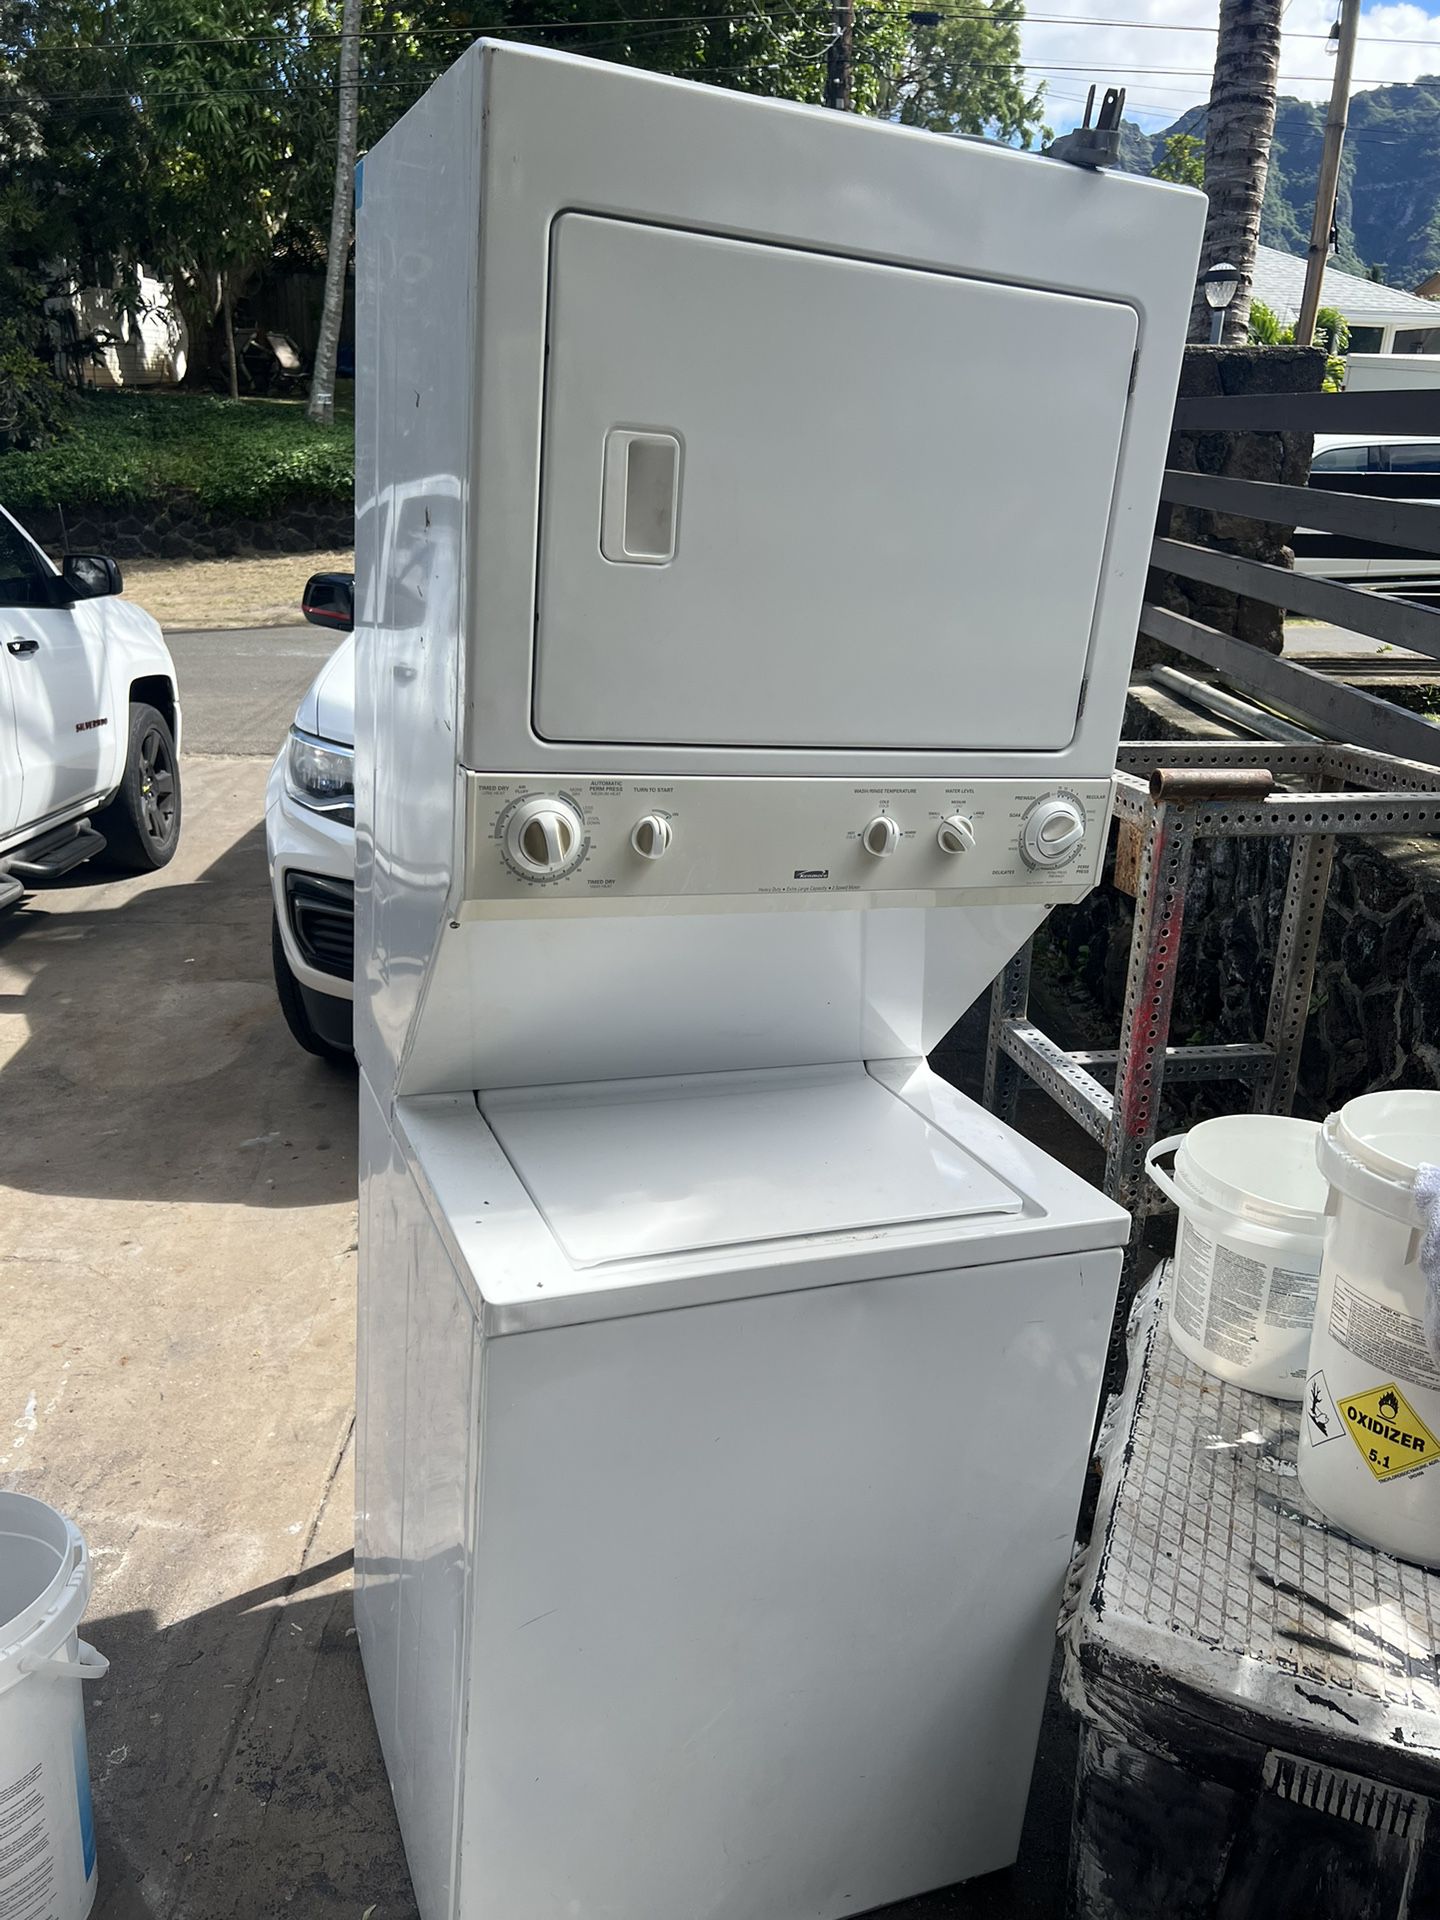 Stack Unit Washer And Dryer